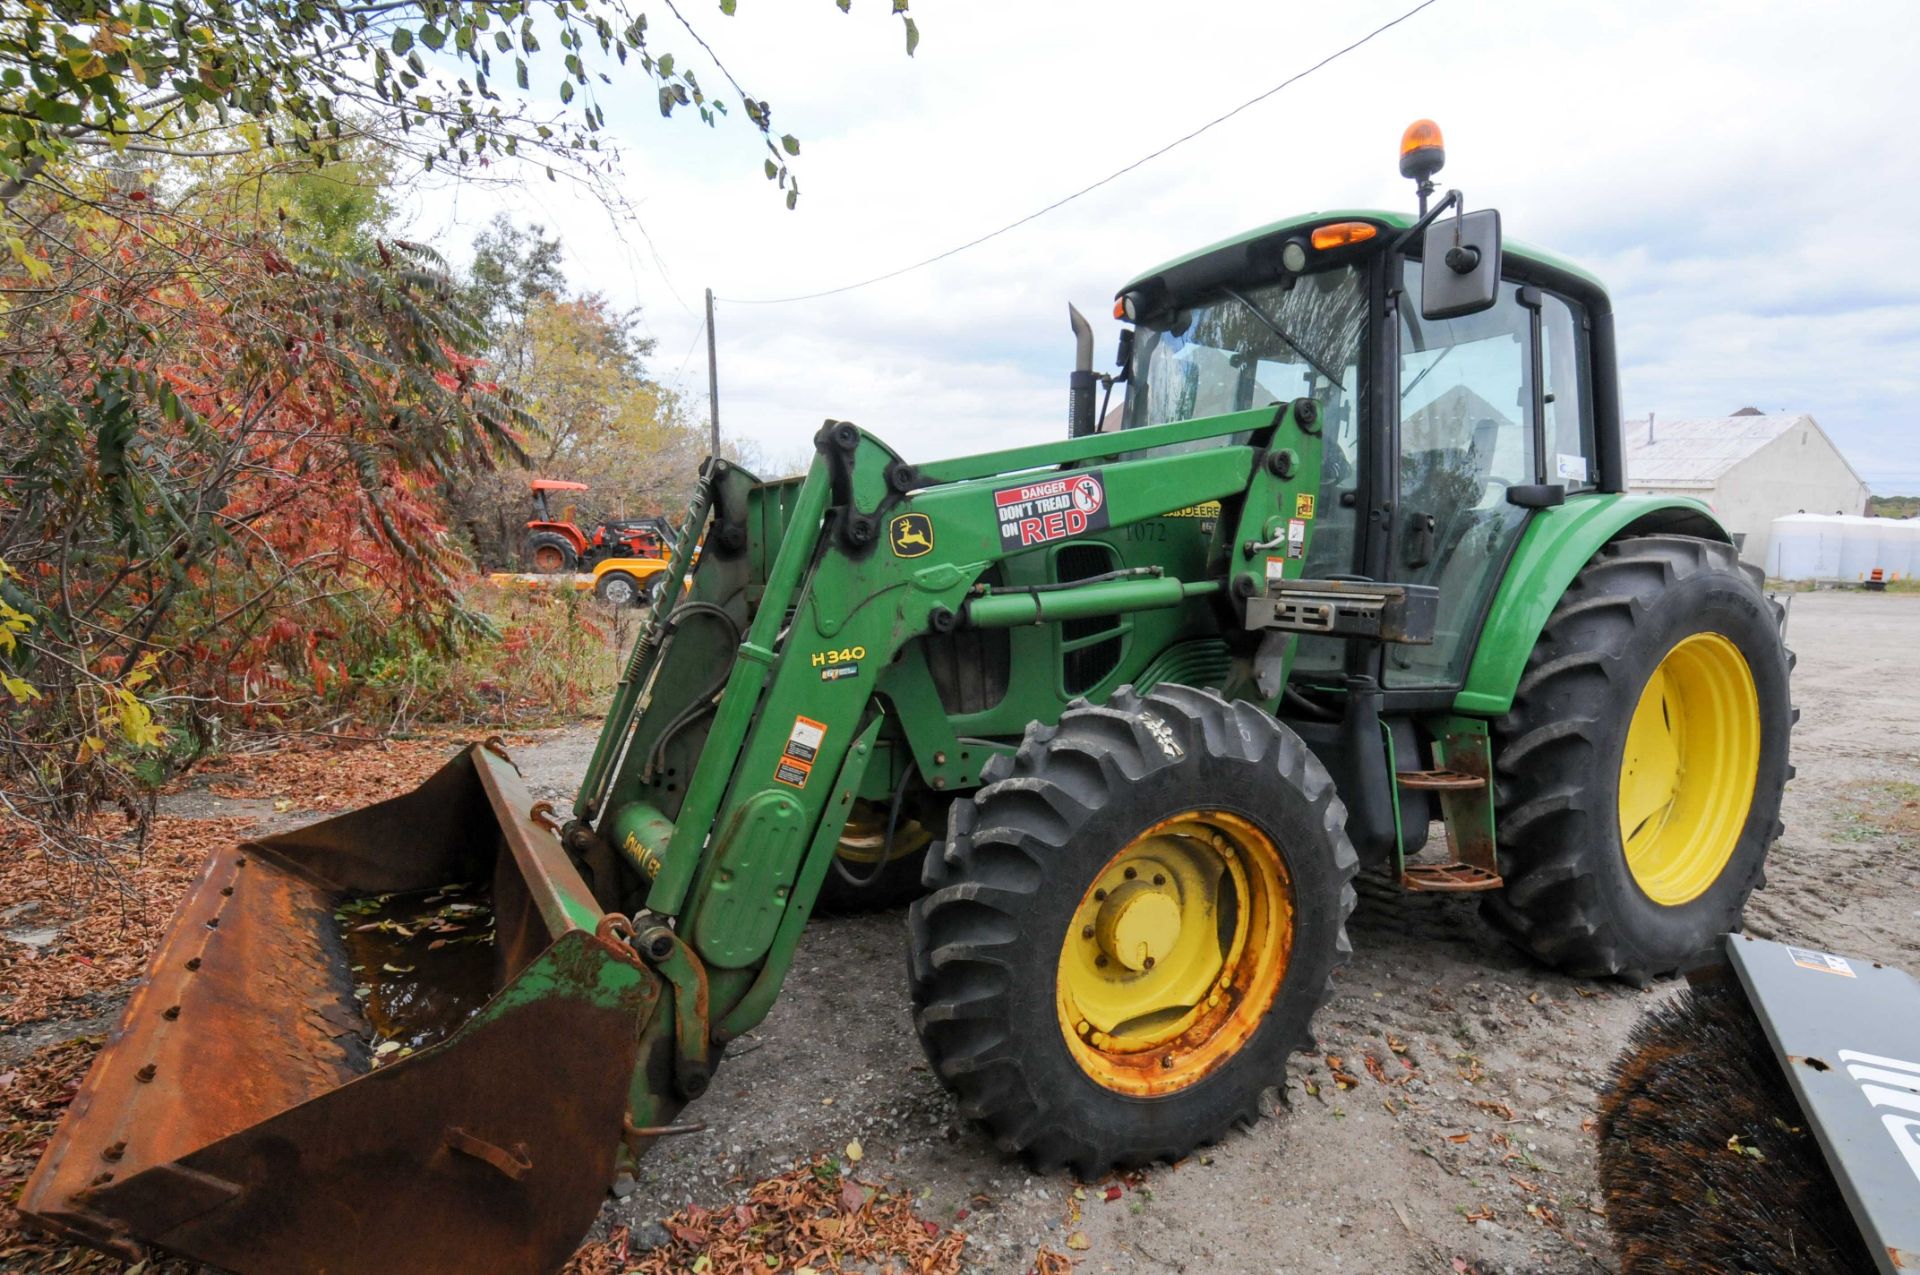 JOHN DEERE (2012) 6430 TRACTOR WITH JD 4.5L ENGINE, 4WD, JOHN DEERE H340 HYDRAULIC LOADER - Image 2 of 9